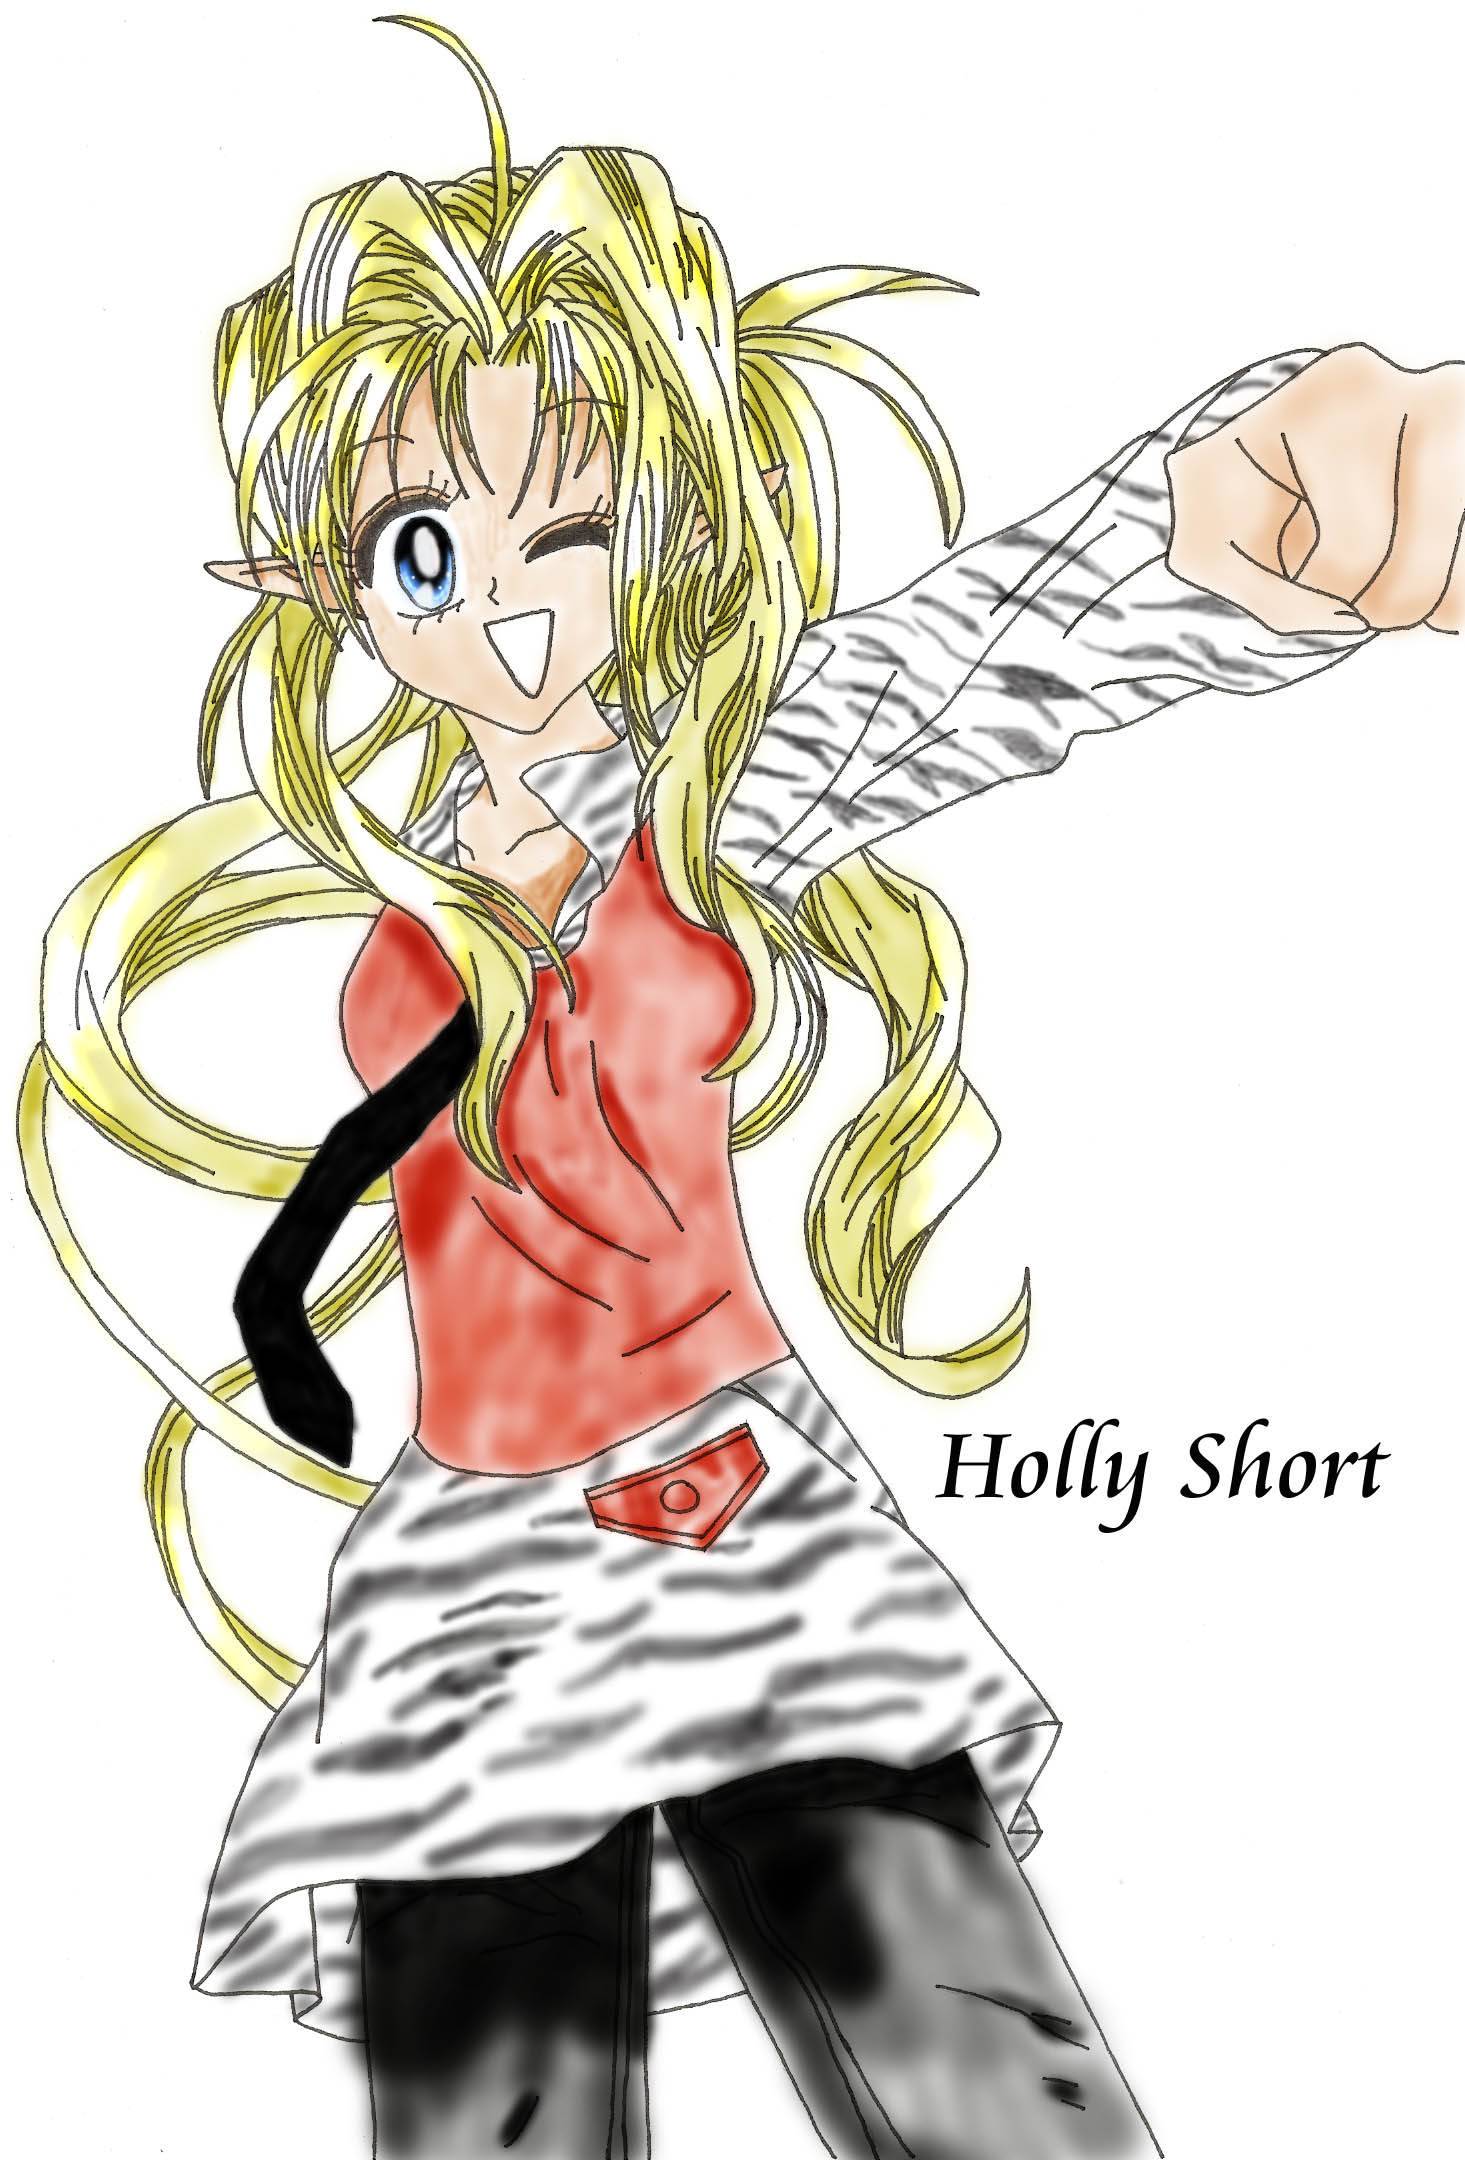 Artemis Fowl - Holly Short by Shadowlover8